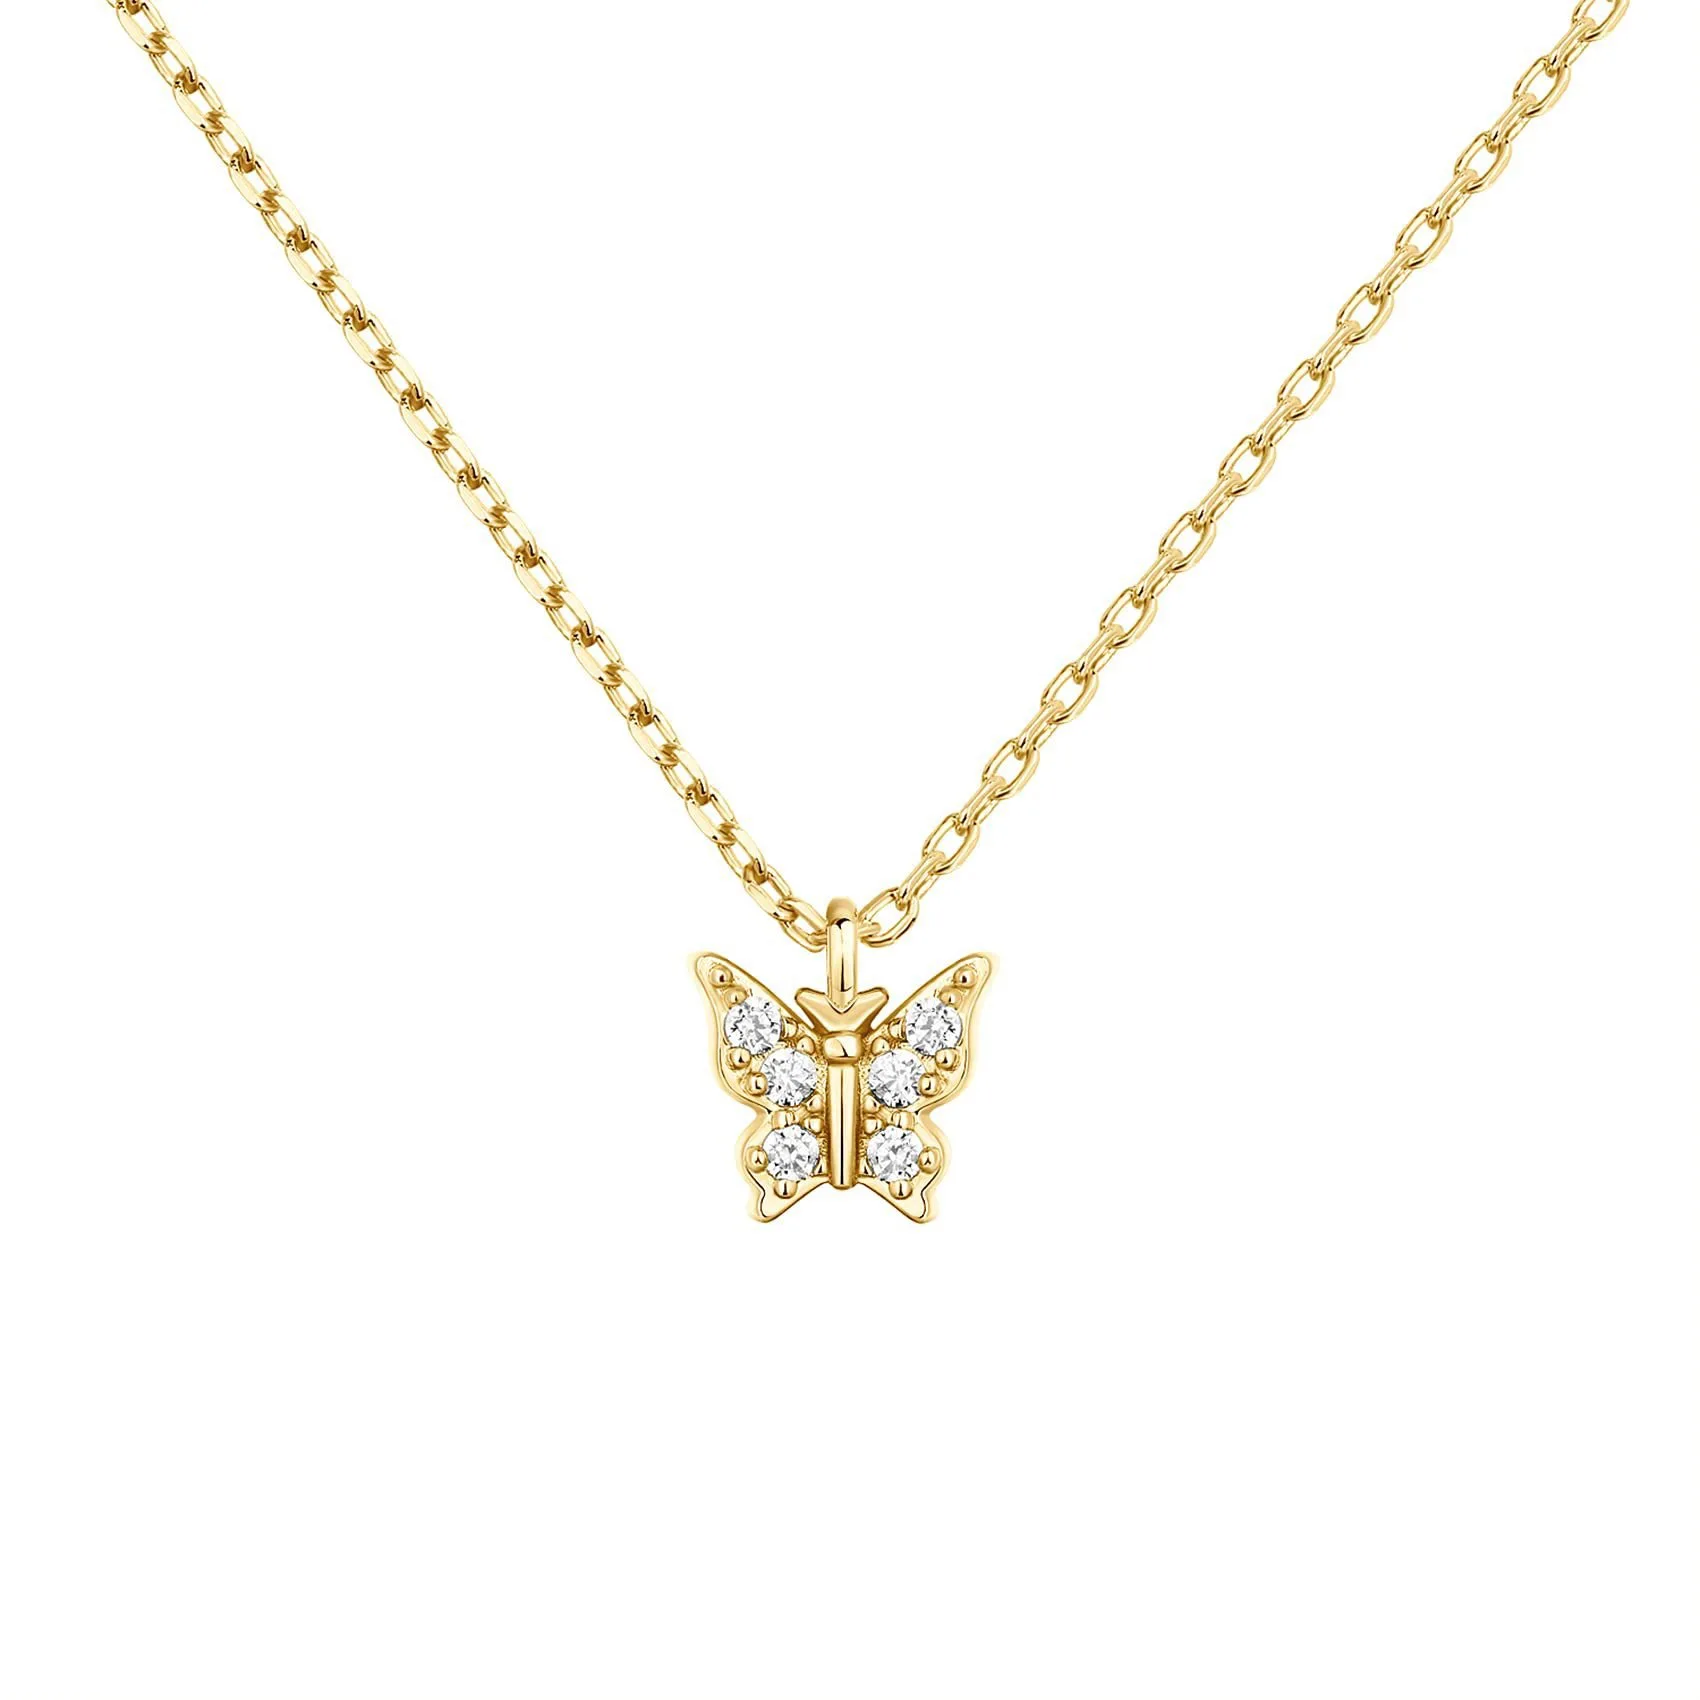 14k gold plated dainty pendant necklace